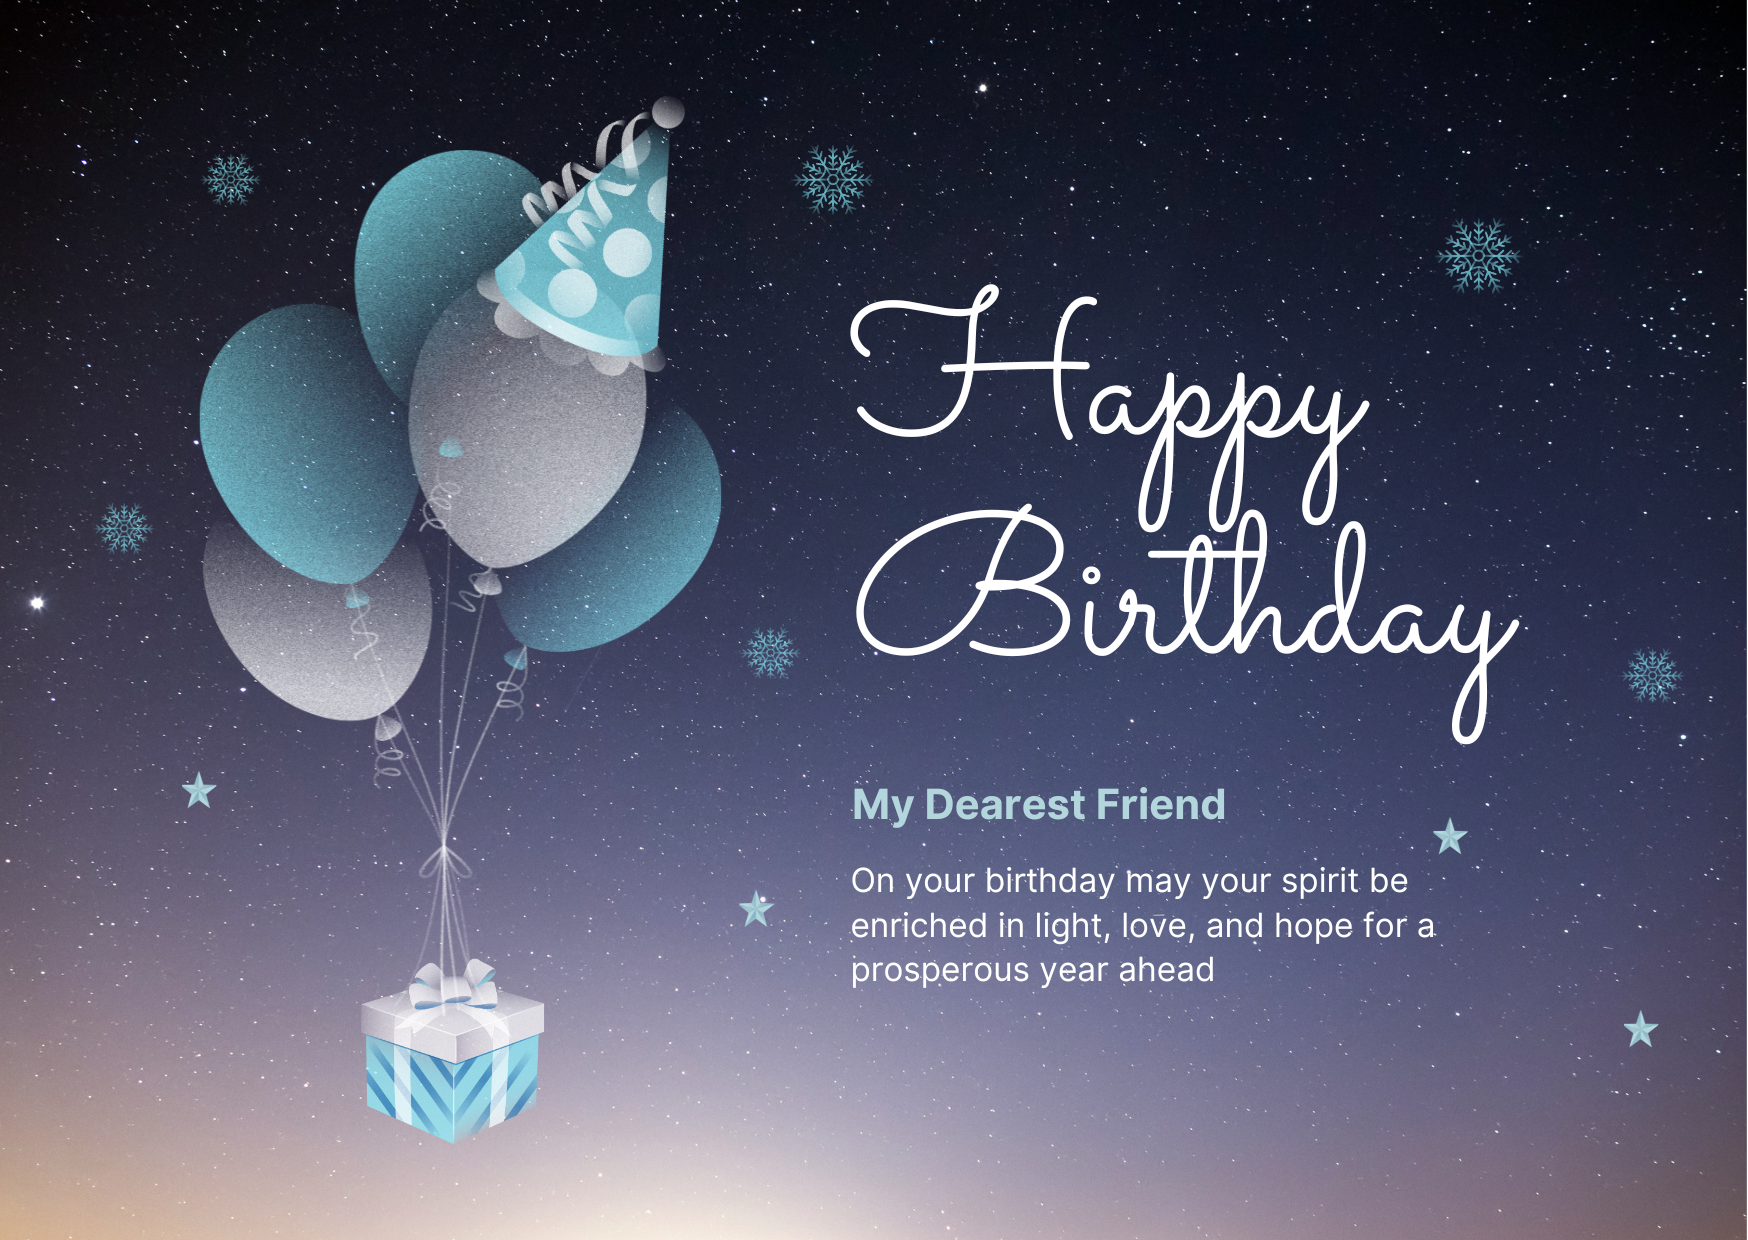 Celebrate Moments: Custom Birthday Card Designs Ready in 24 Hours!